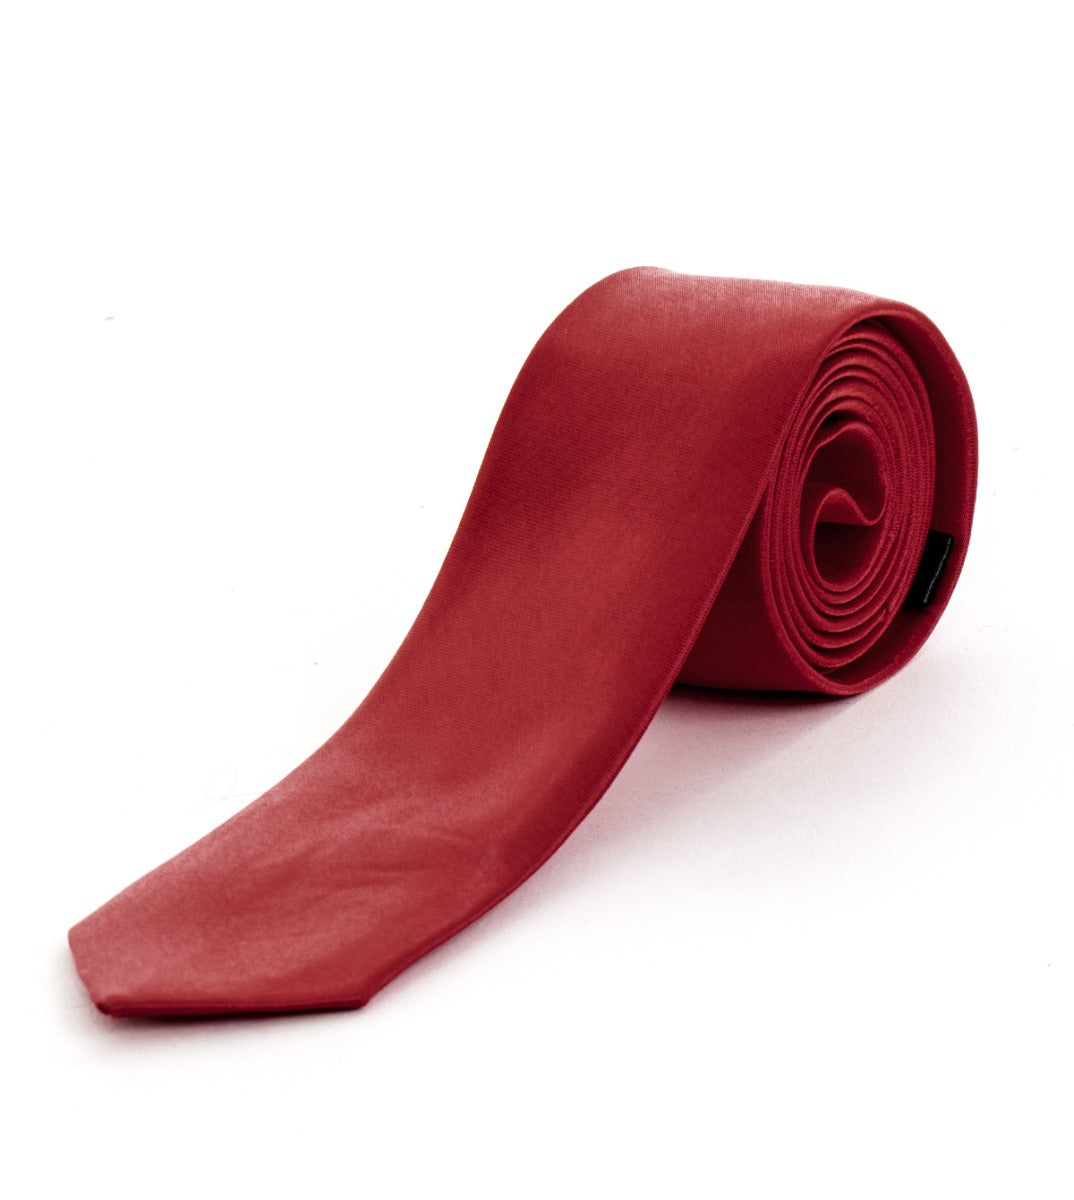 Unisex Men's Tie Thin Tie Elegant Casual Ceremony Basic Red Satin GIOSAL-CP1046A